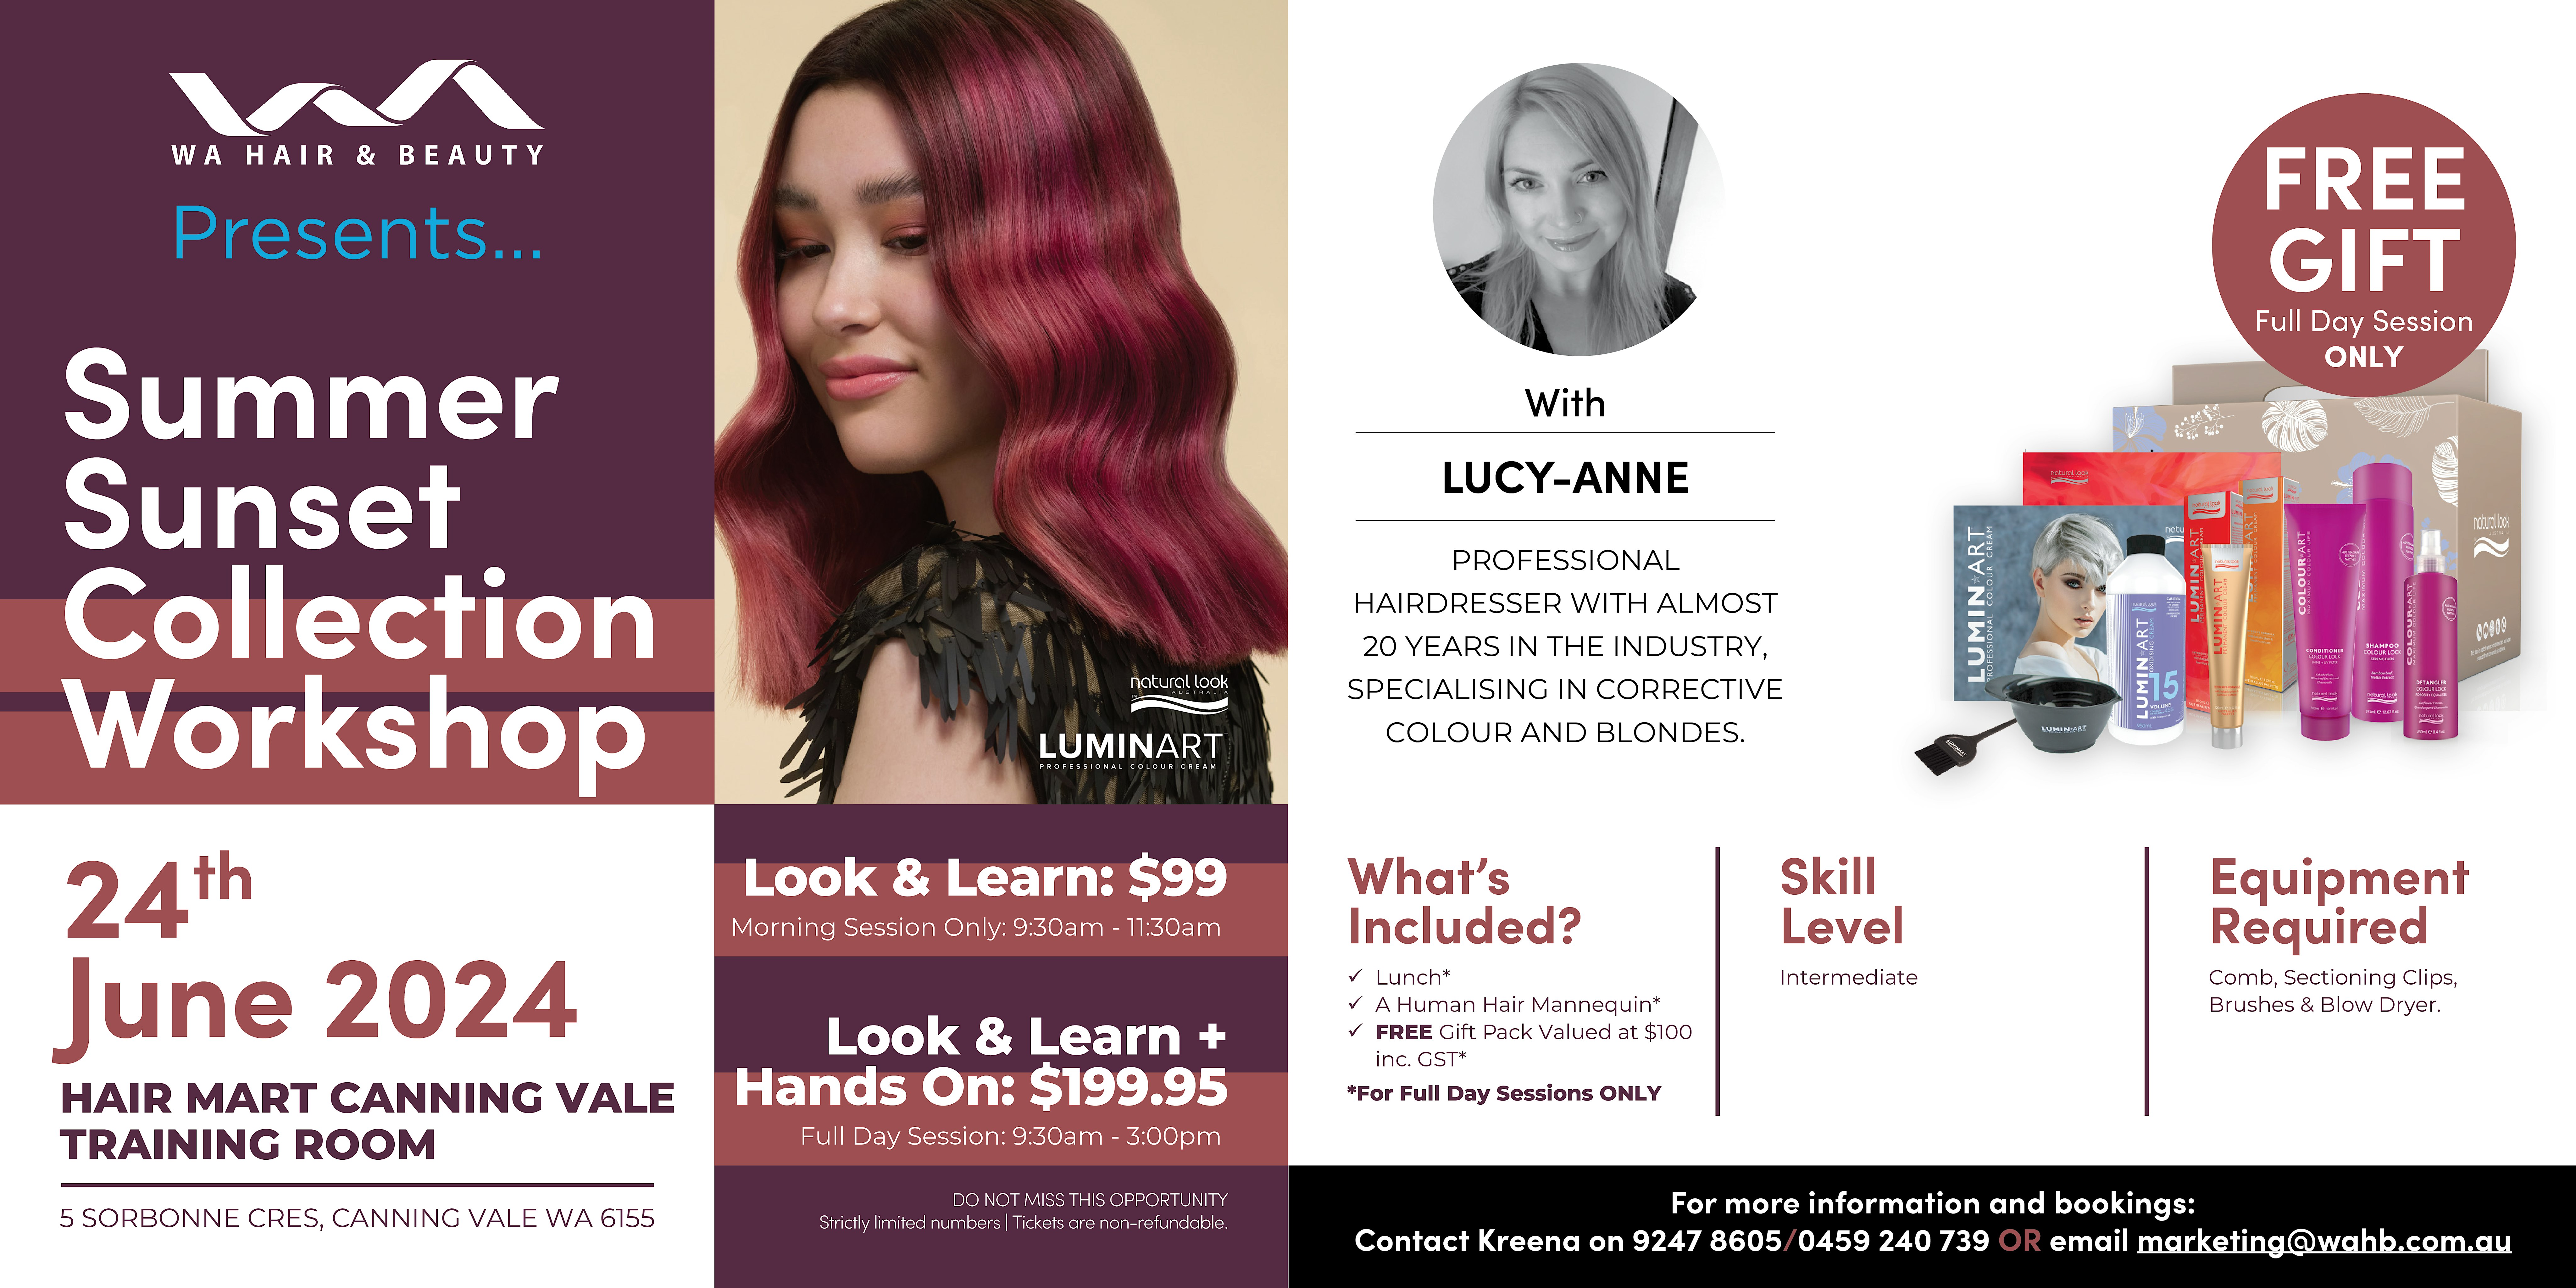 Summer Sunset Collection – Look & Learn + Hands on